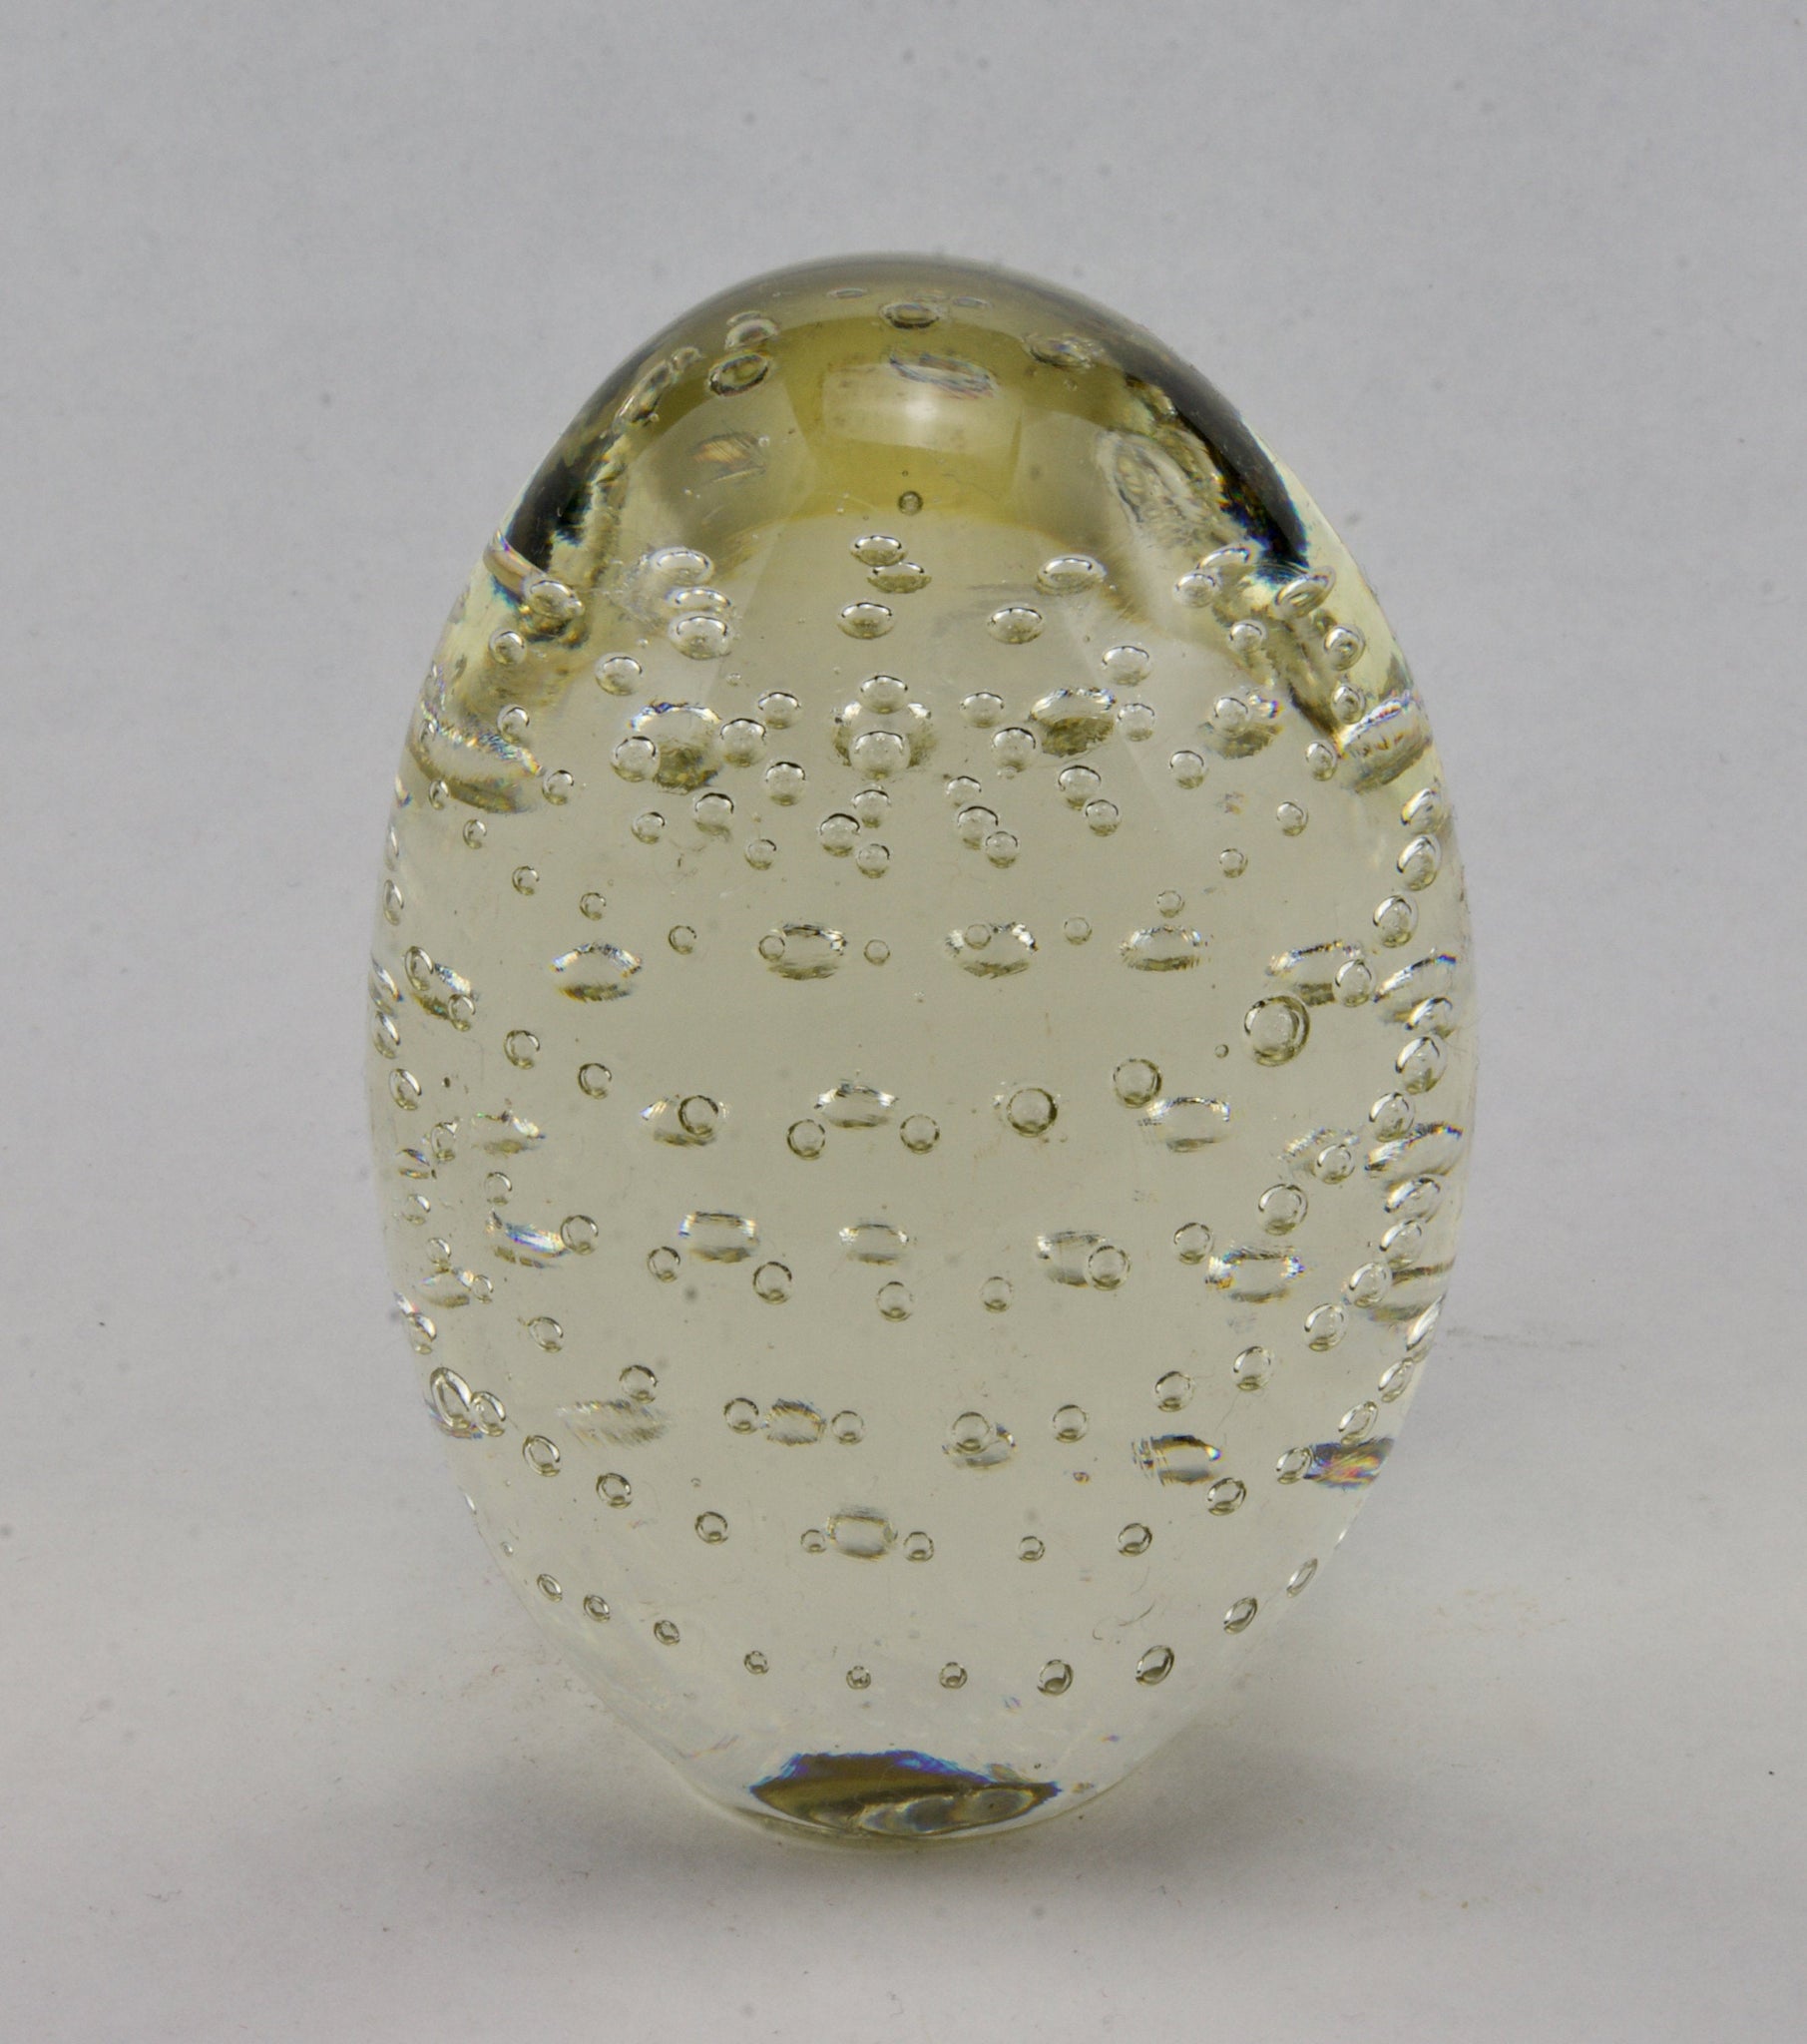 Egg Shaped Glass Paperweight with Bubbles